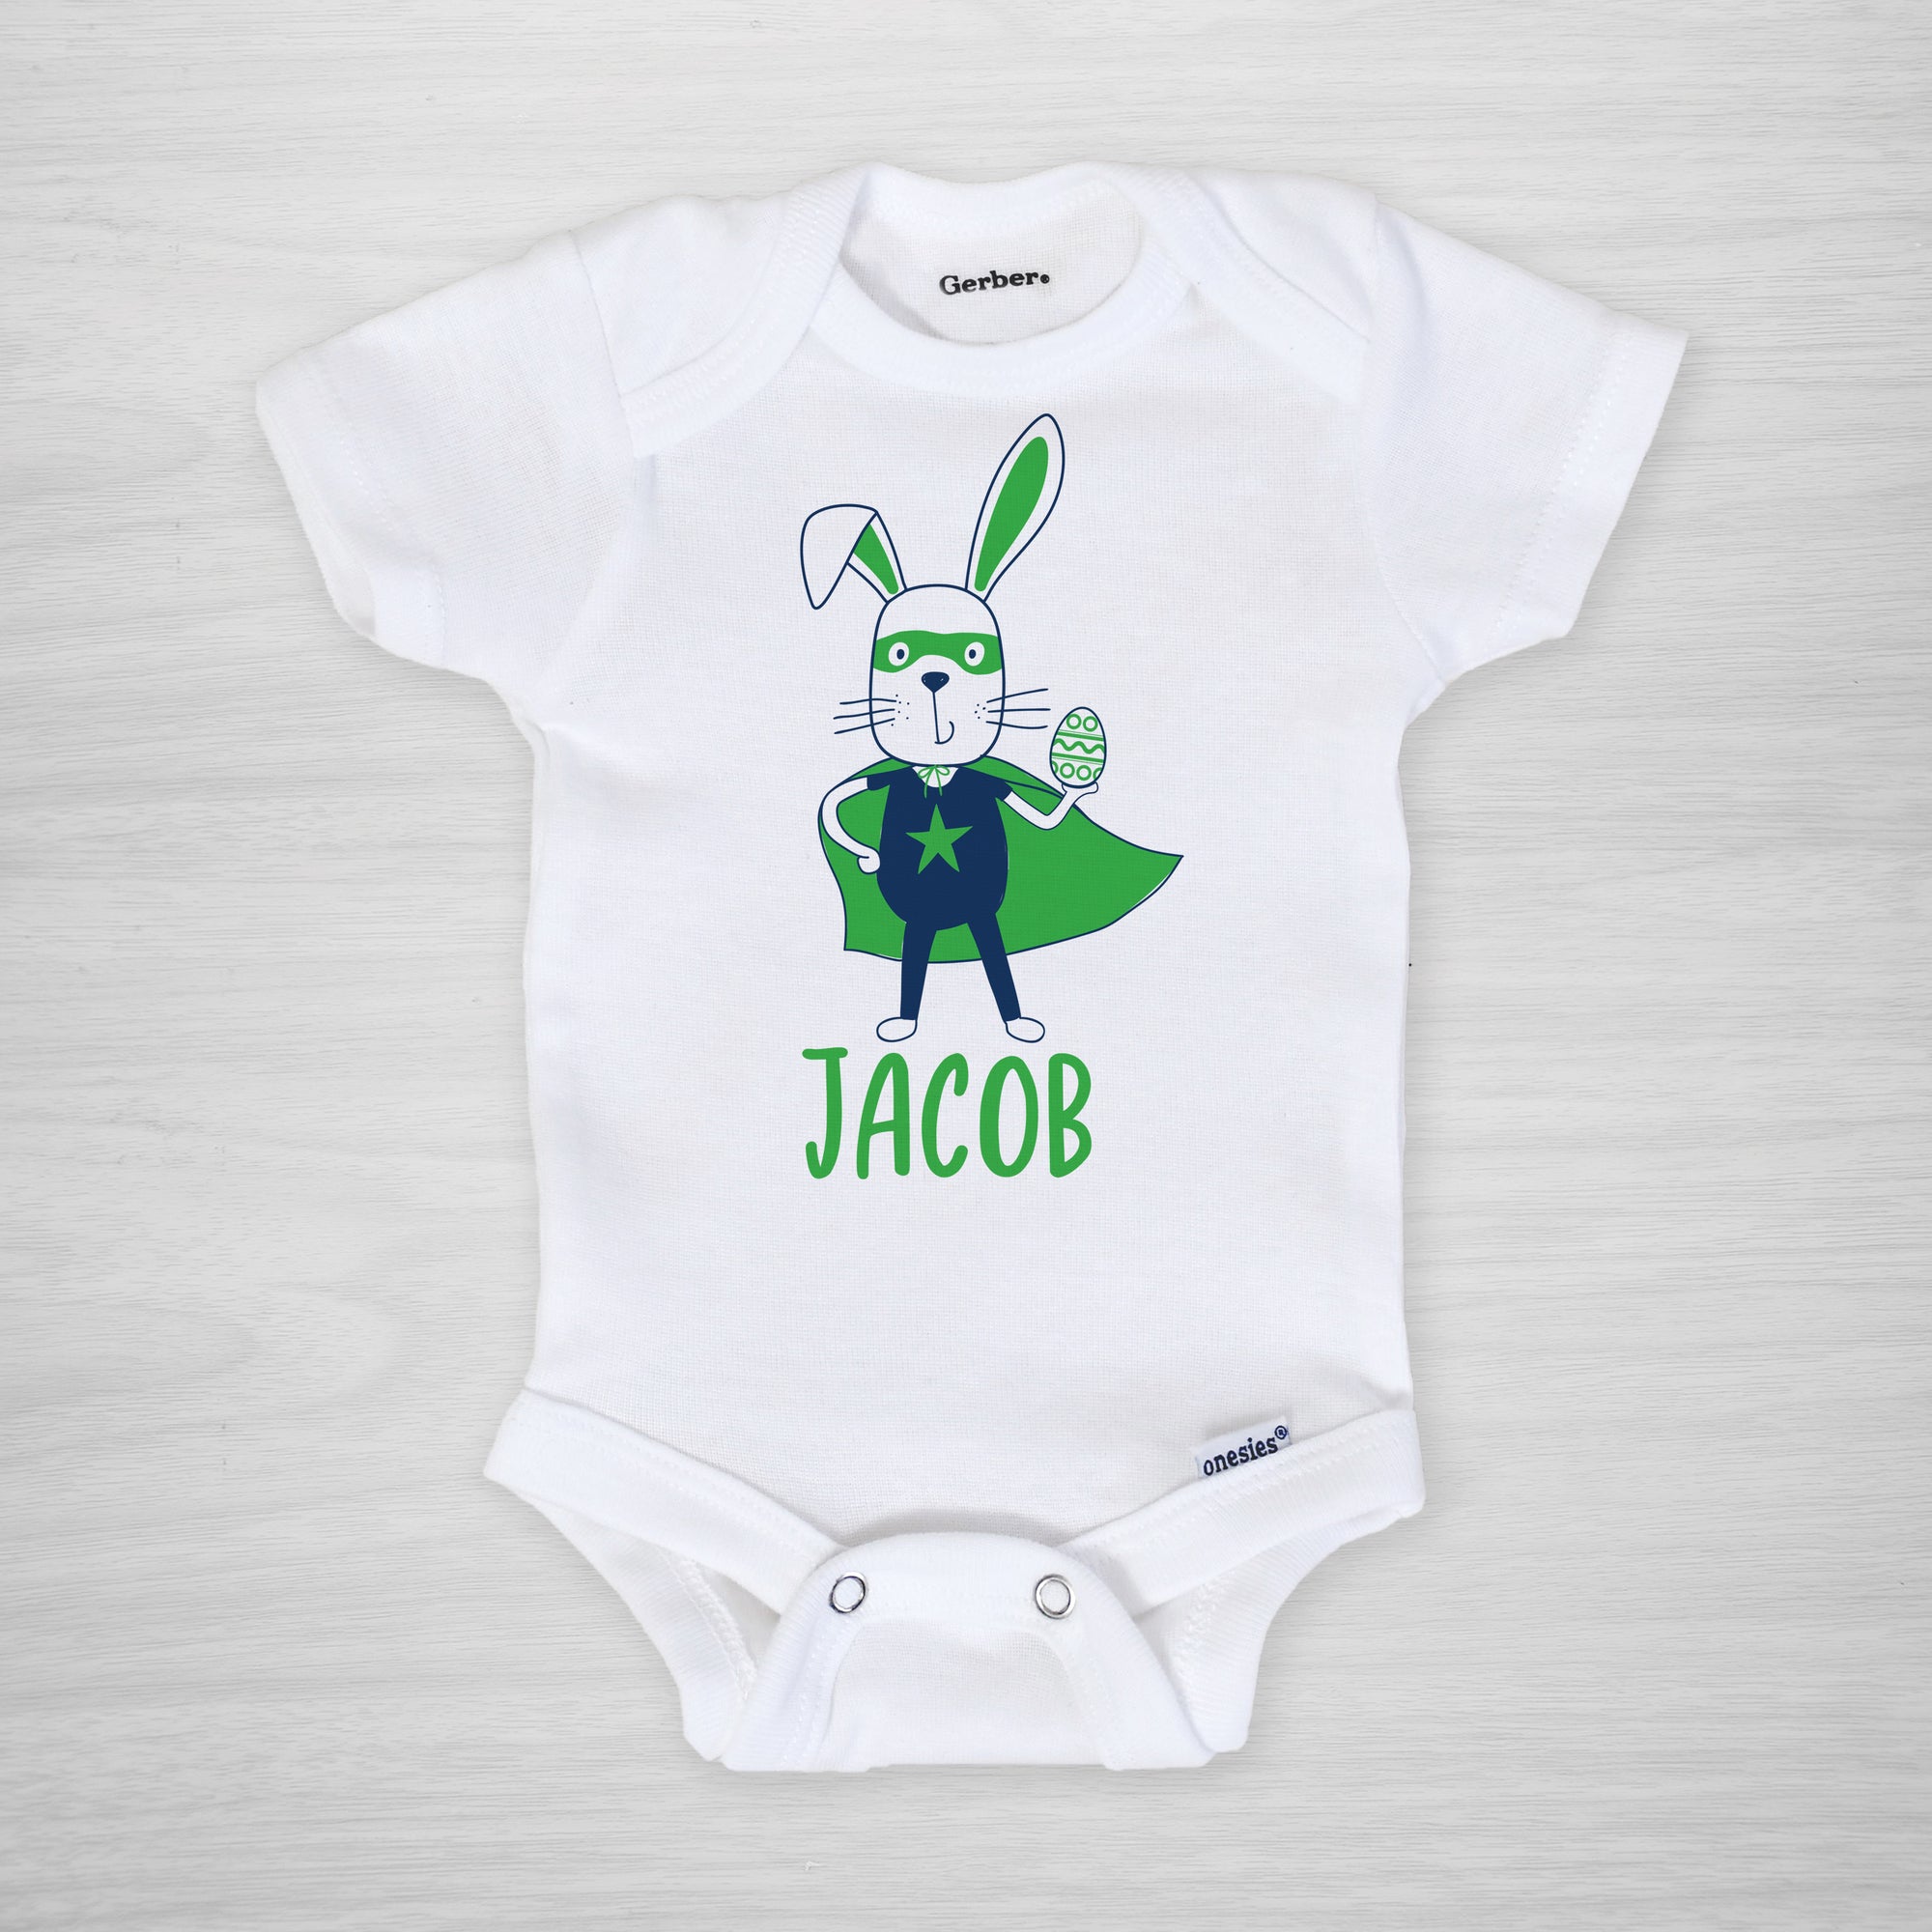 Superhero Easter Bunny with a cape, mask, and egg on this personalized Gerber Onesie®, short sleeved blue